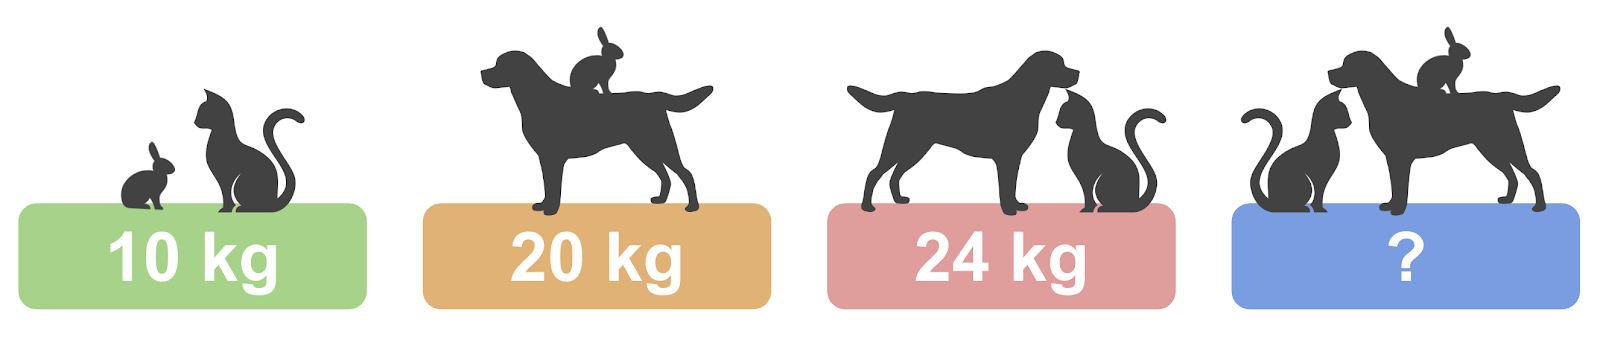 Four coloured masses labelled below different combinations of pet silhouettes. Green rectangle labelled 10 kg below a rabbit and cat silhouette, orange rectangle labelled 20 kg below a dog and rabbit silhouette, red rectangle labelled 24 kg below a dog and cat silhouette, and a blue rectangle labelled with a question mark below a dog, cat, and rabbit silhouette.